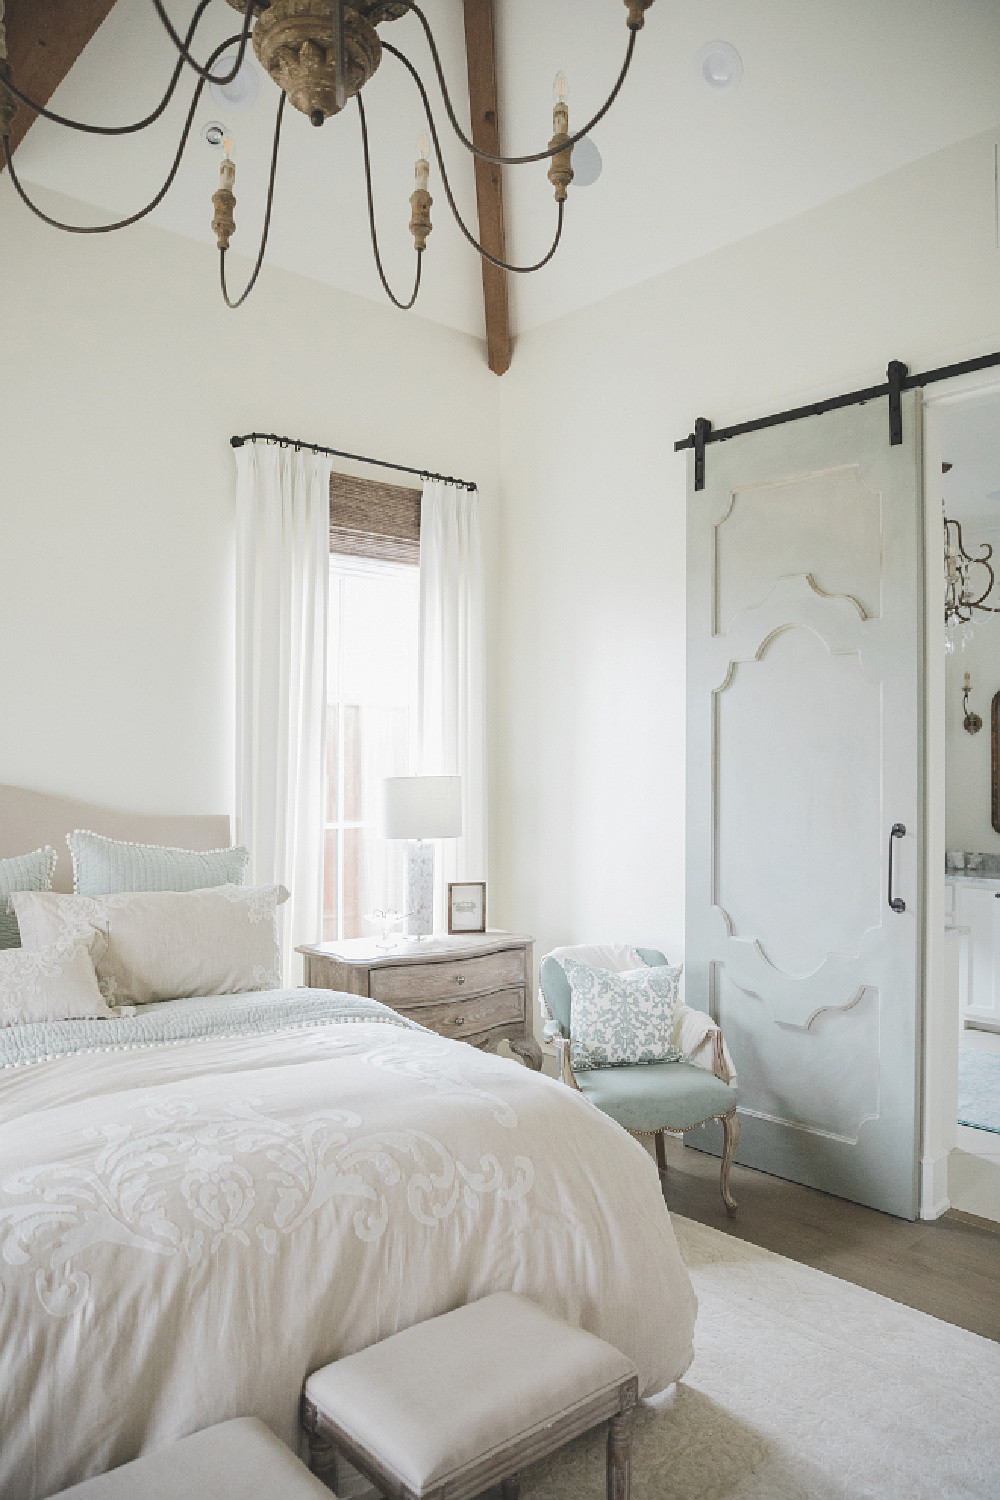 French country farmhouse bedroom with Duck Blue barn door and Sherwin Williams Alabaster paint color on walls. Brit Jones Design.